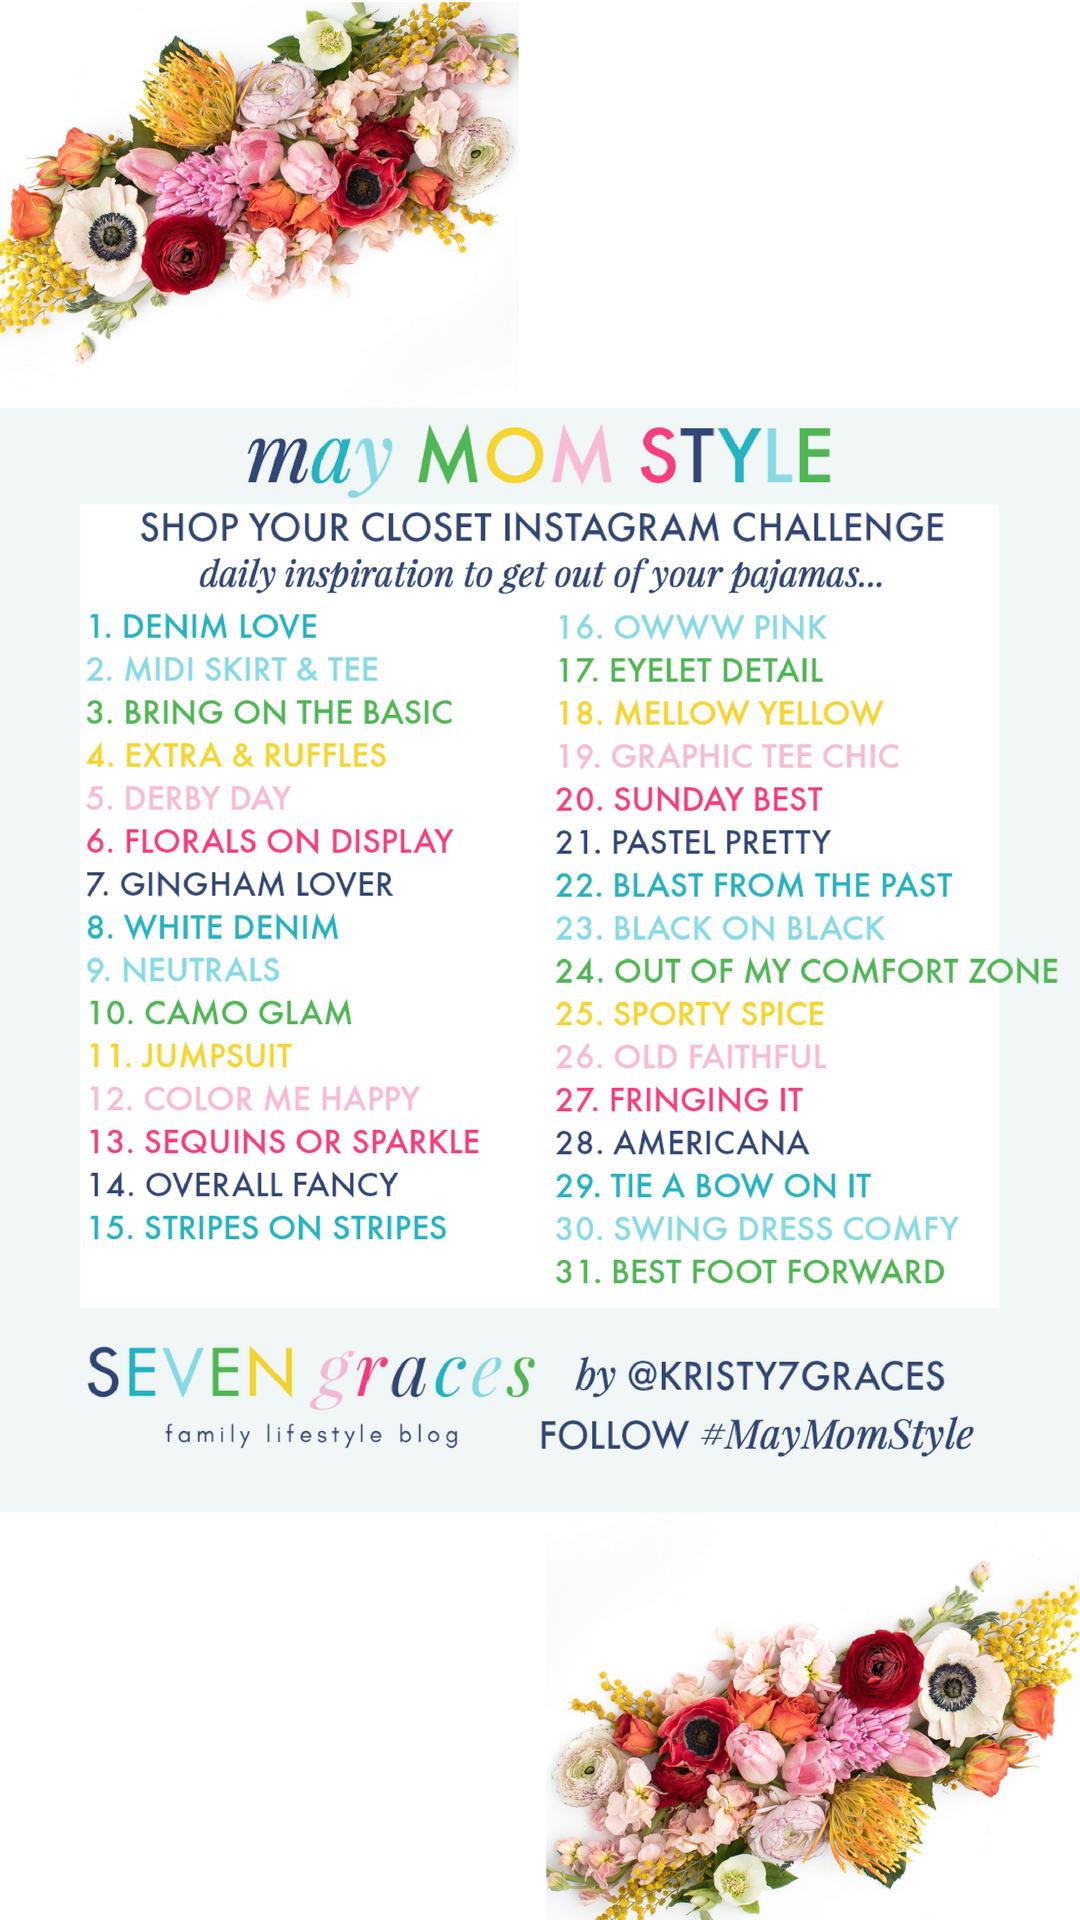 Read and be inspired by the most fun style challenge on Instagram right now! Don't miss out on all of the inspiration from Seven Graces Blog! @kristy7graces does the May Mom Style Challenge again! #stylechallenge #maymomstyle #momstyle